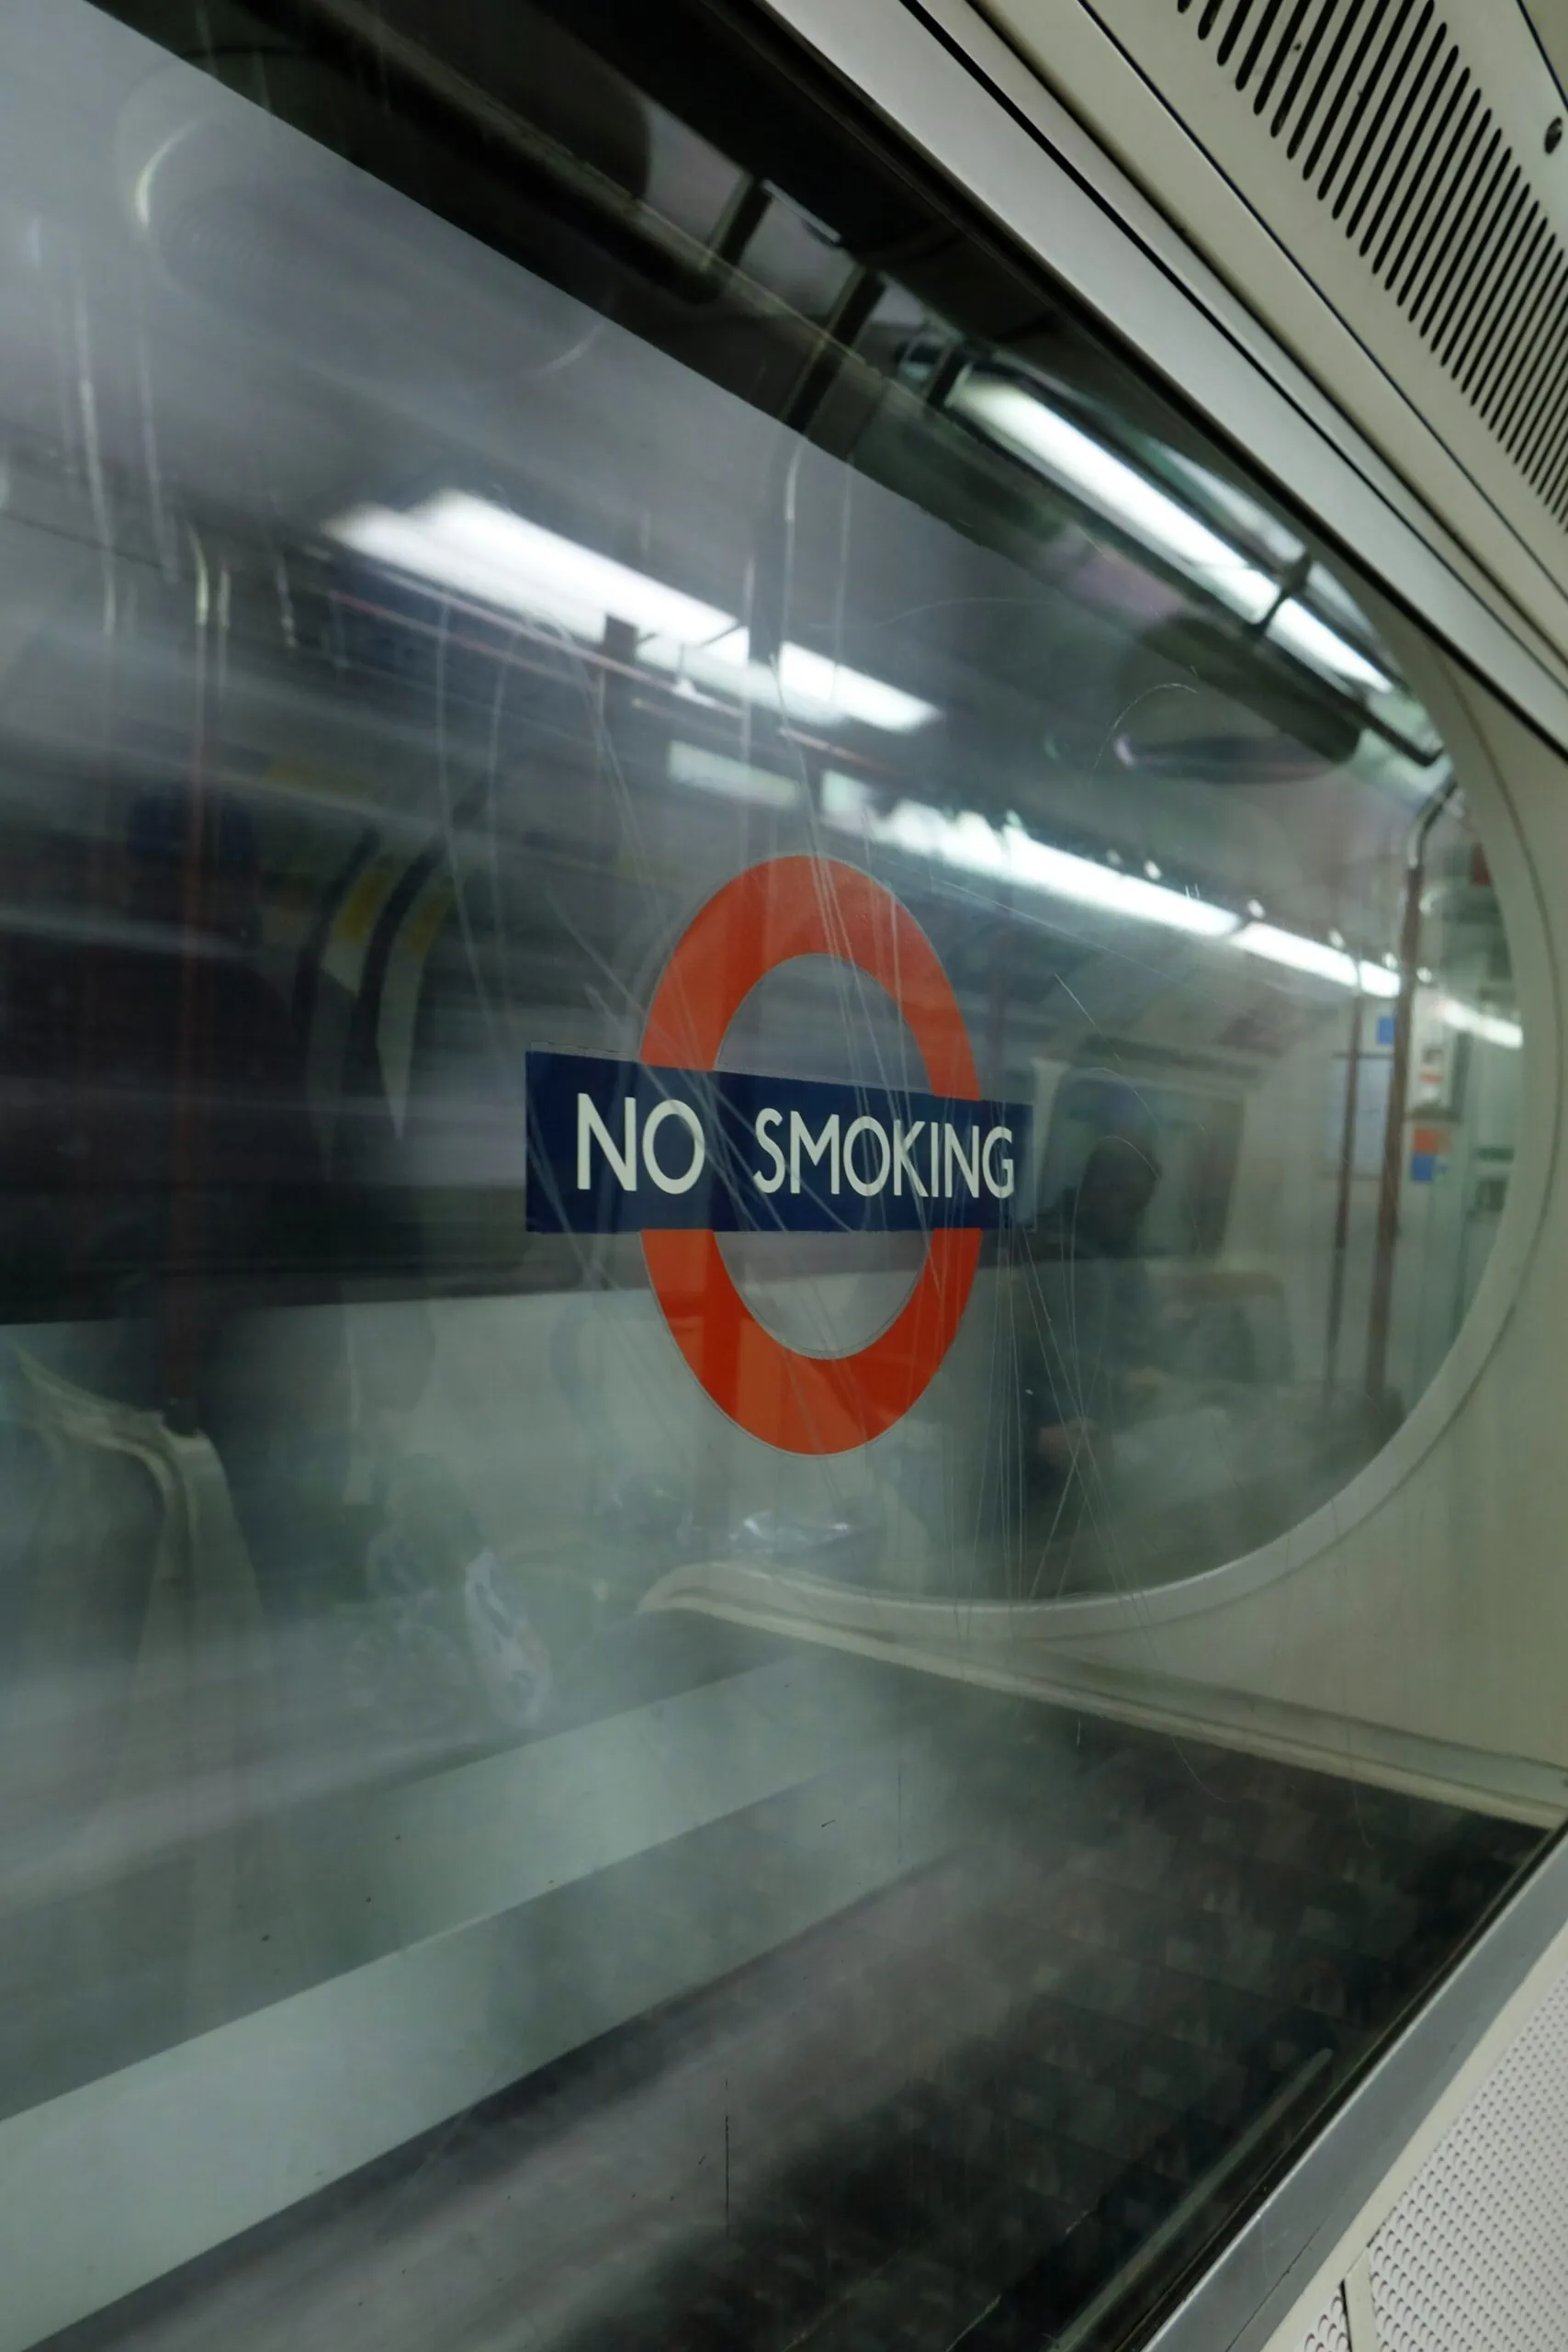 Subway window with no smoking rule displayed and reinforced by vape sensors